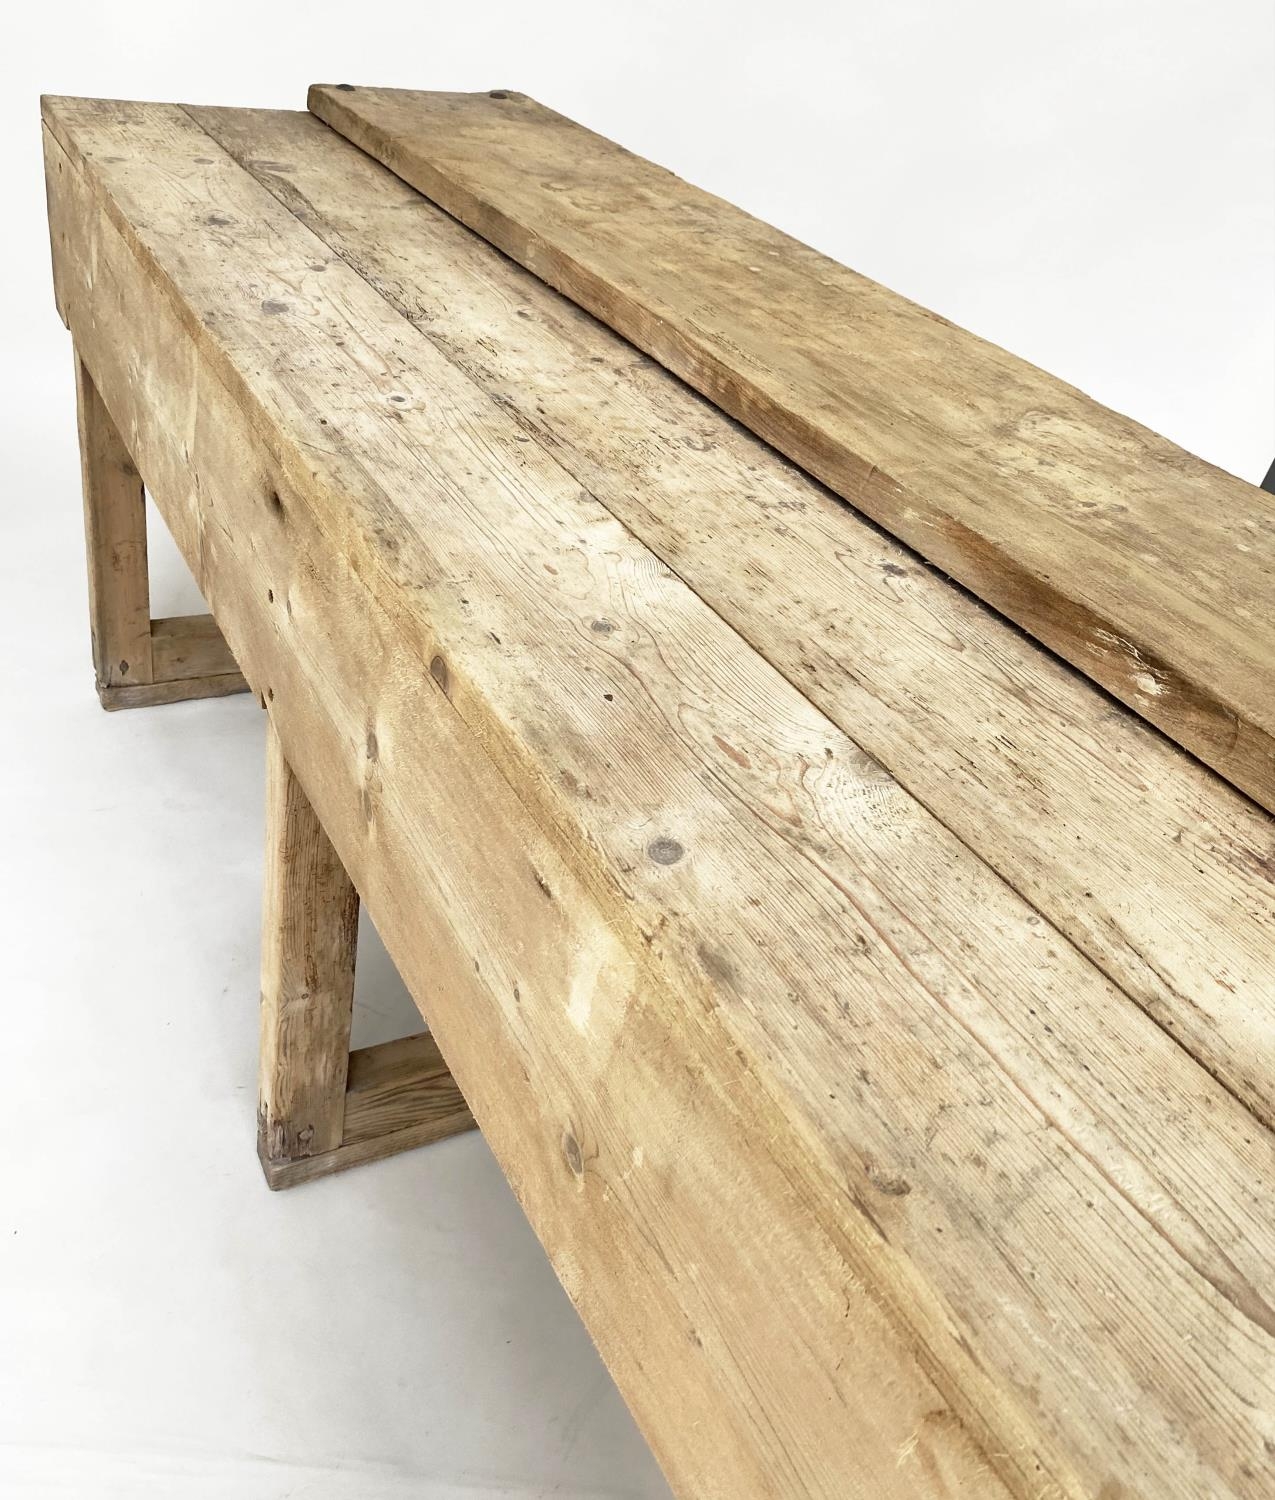 WORK BENCH, vintage/early 20th century broad planked pine, 211cm x 62cm x 80cm H. - Image 2 of 8